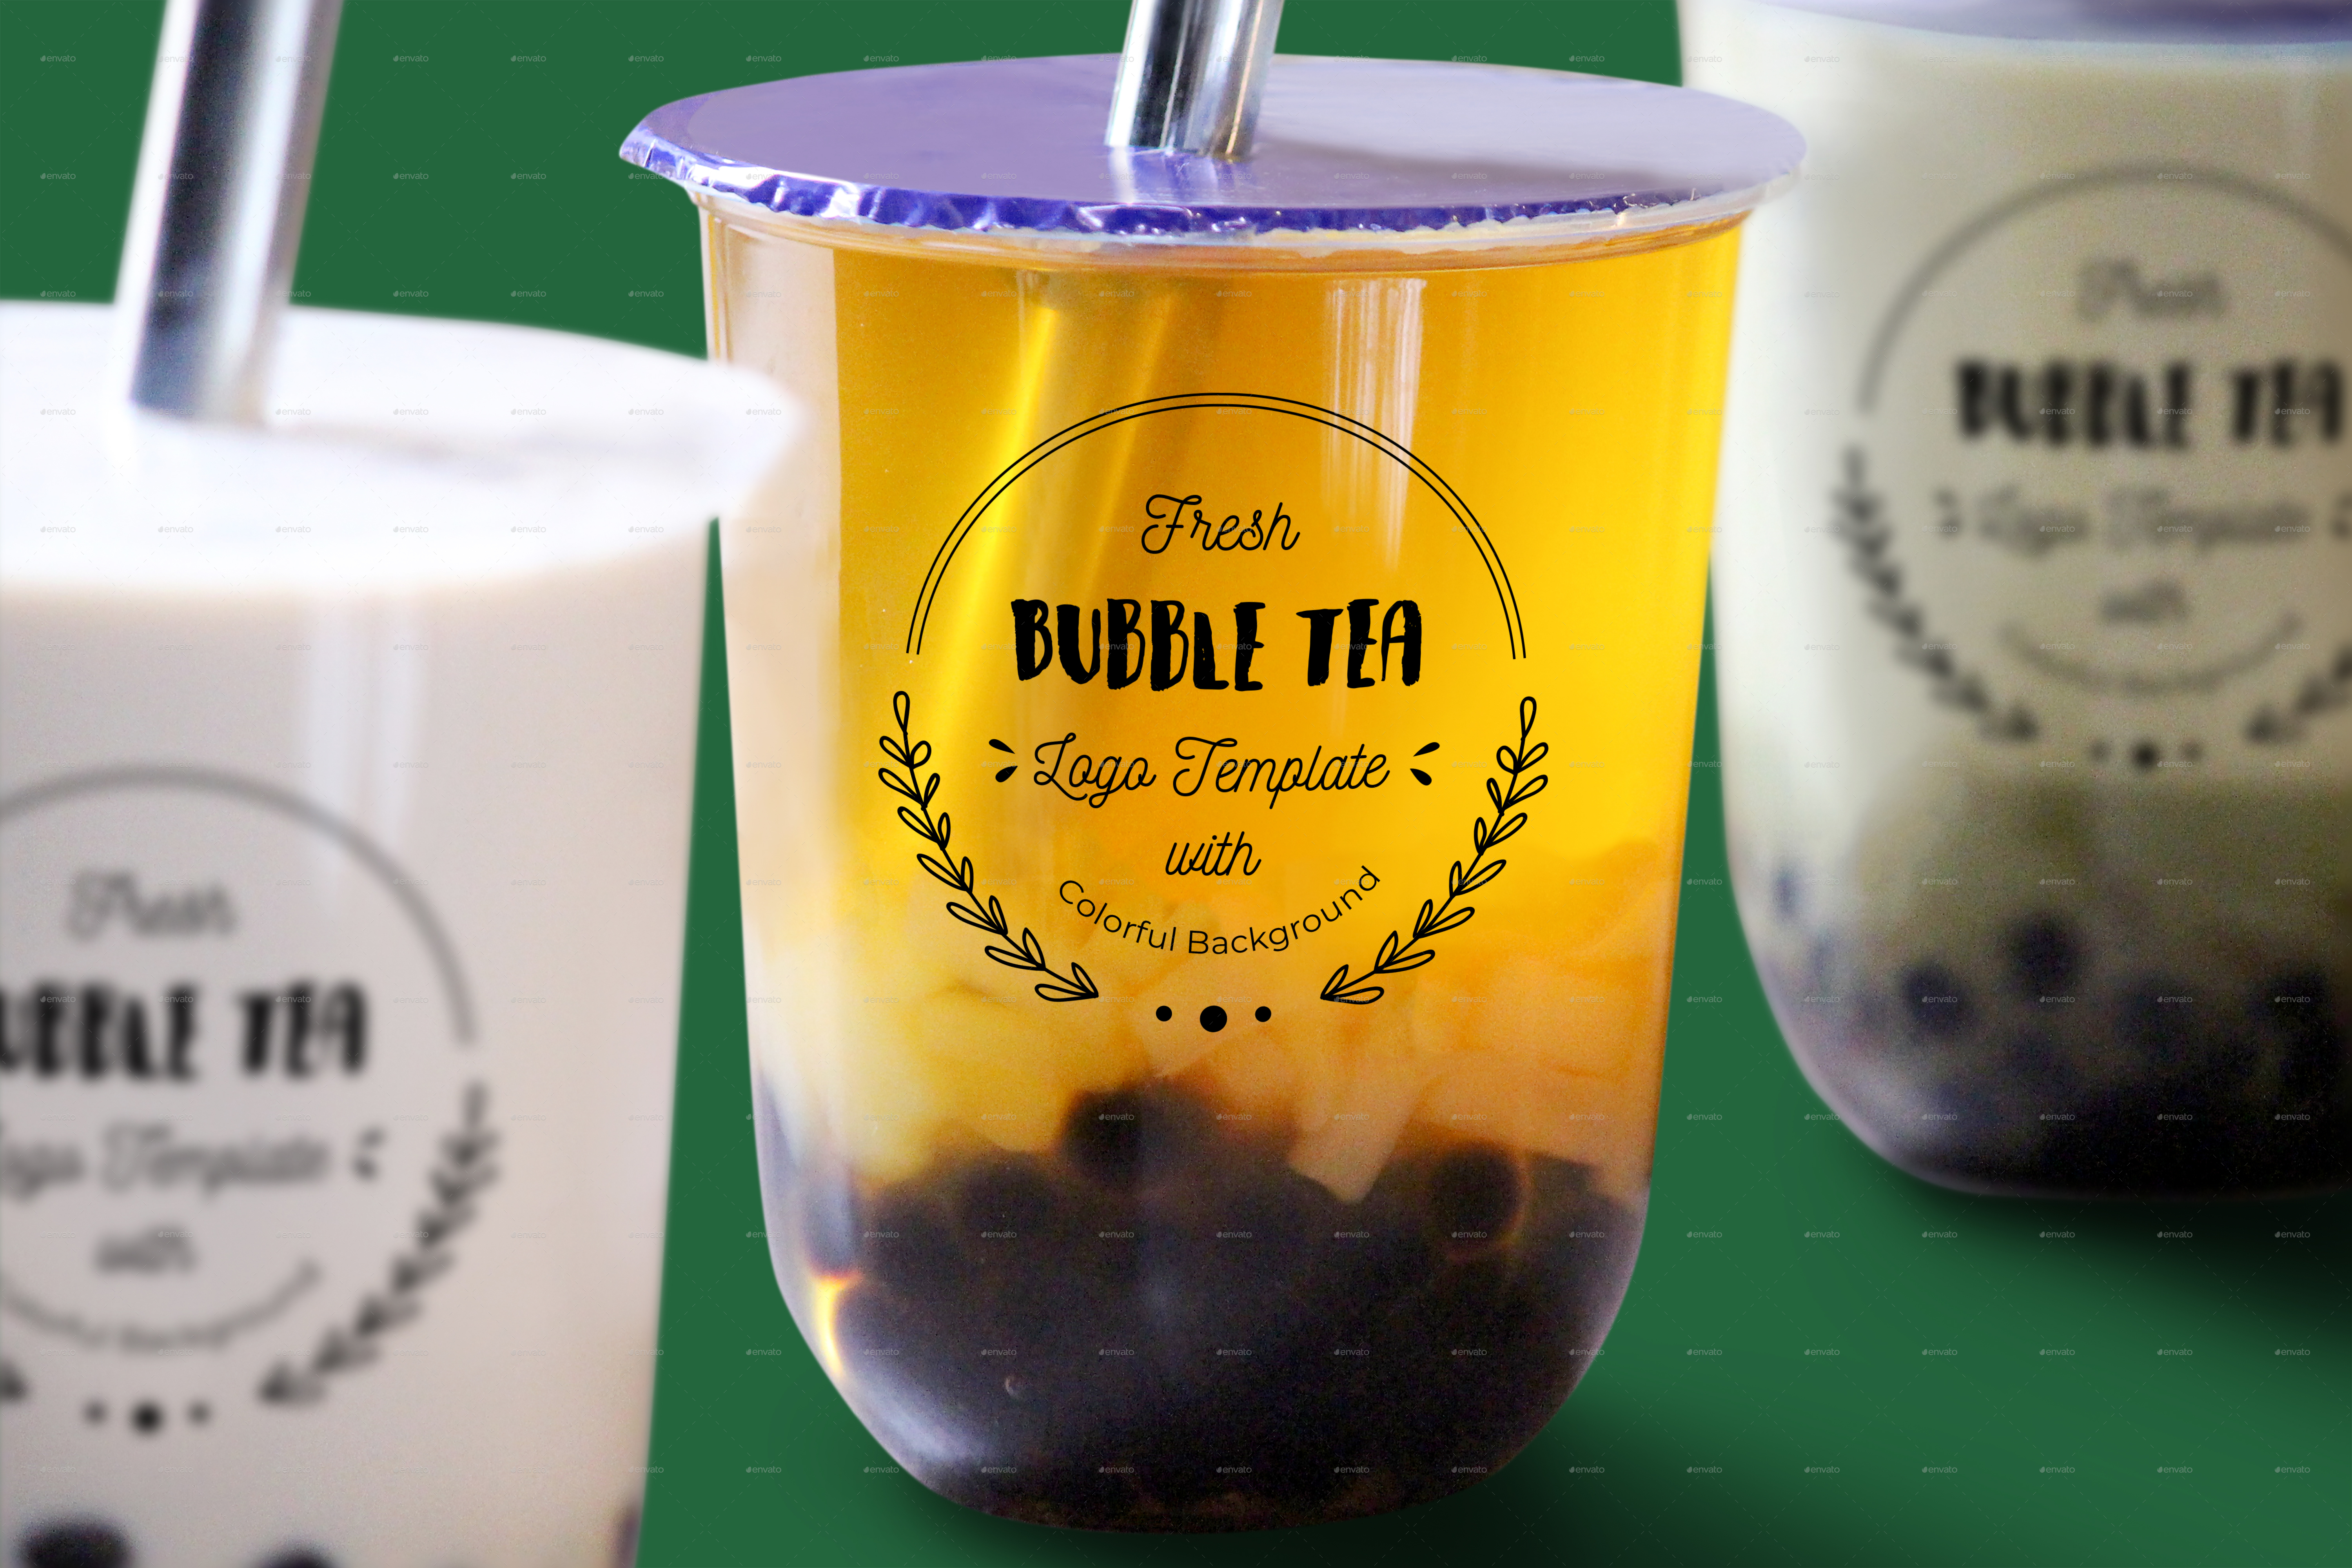 Download Bubble Tea PSD Mock-up by Miuaho | GraphicRiver